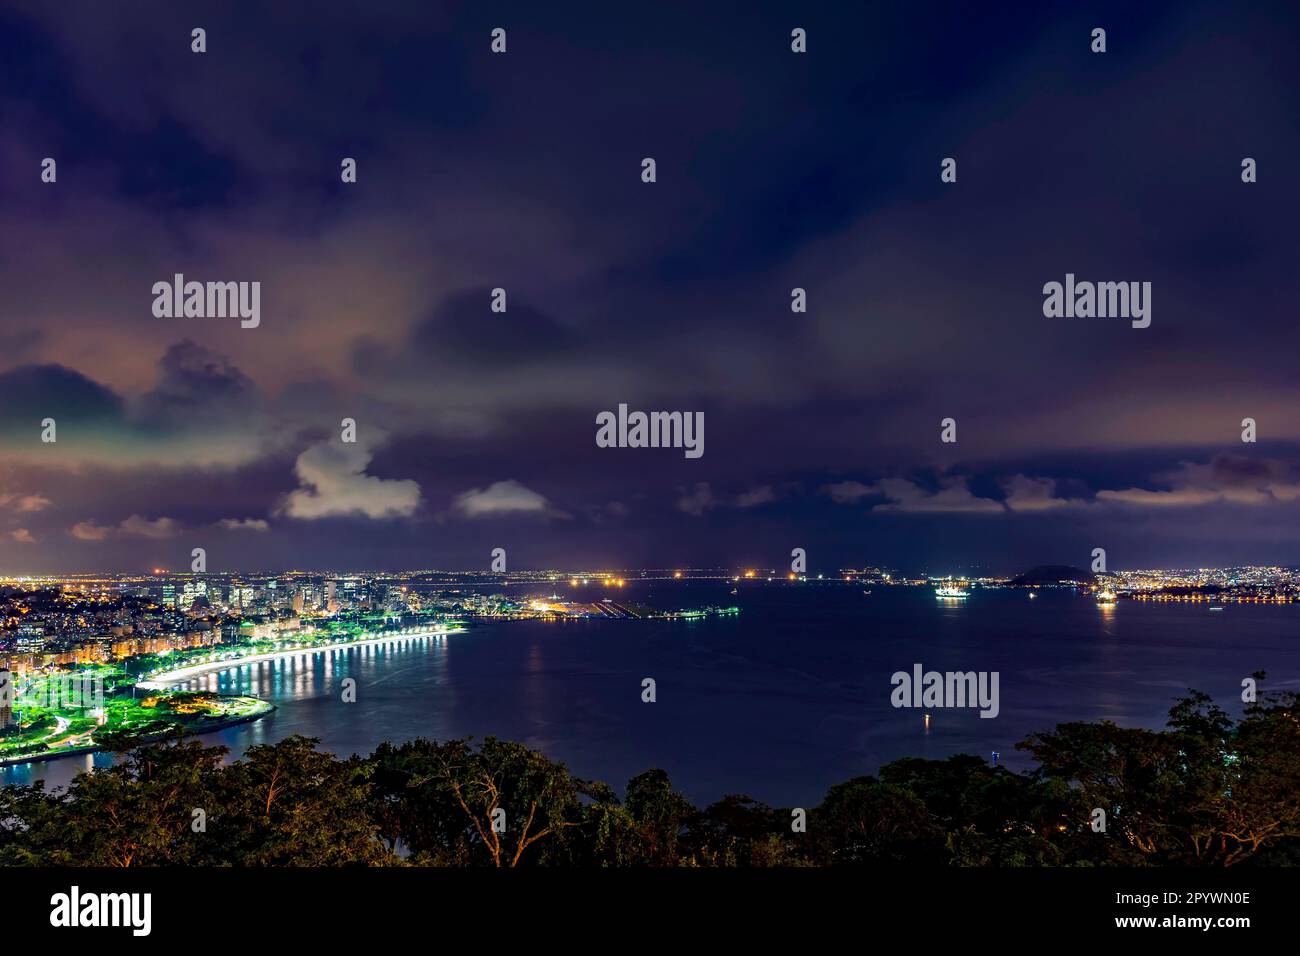 Night view of Rio de Janeiro downtown, Guanabara bay, Santos Dumont airport, Flamengo beach and the streets and buildings of city illuminateds, Brasil Stock Photo